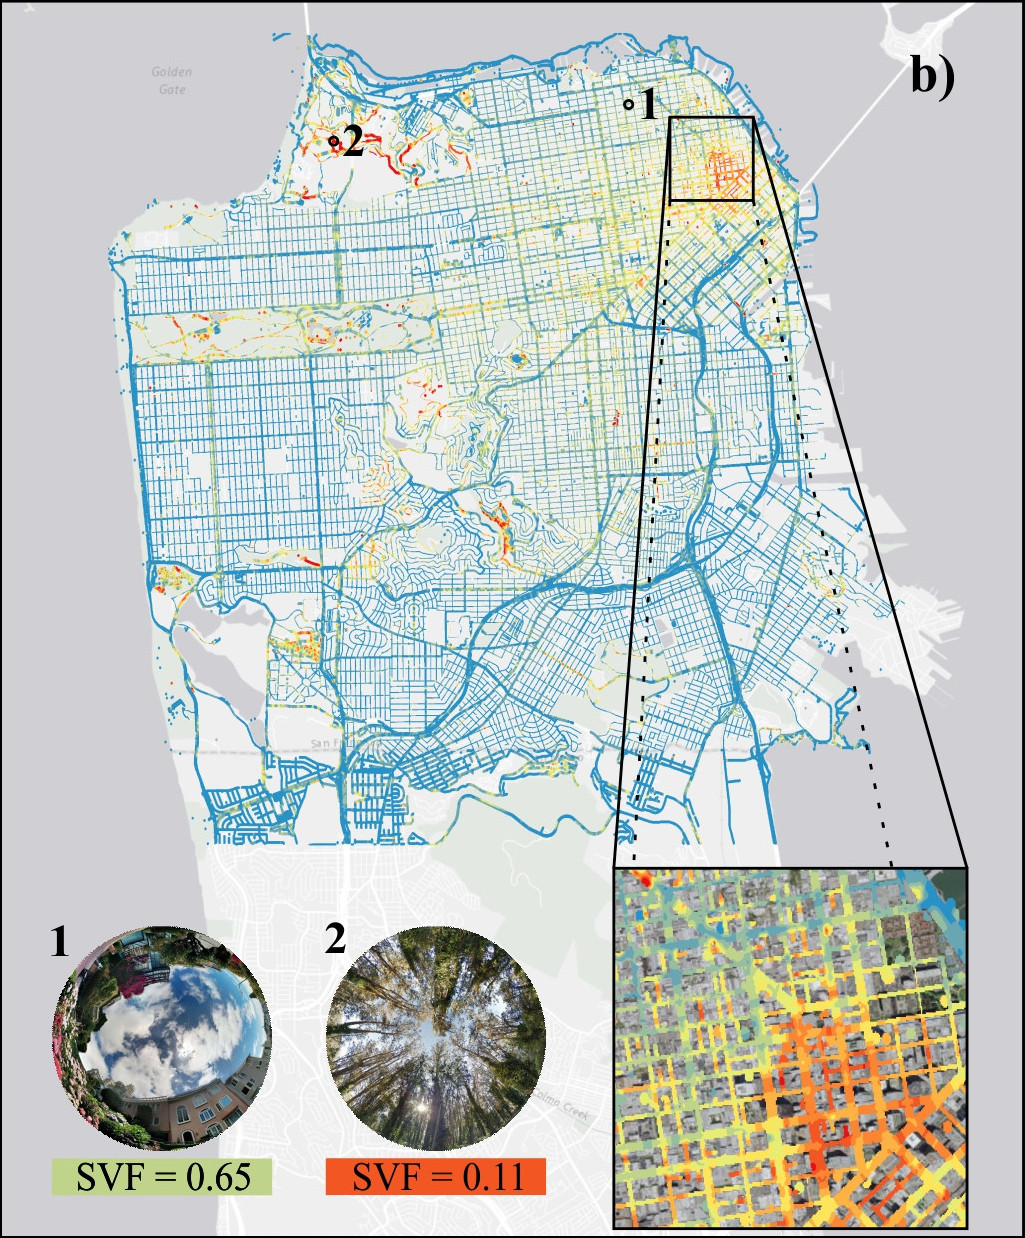 Sky View Factor Footprints for Urban Climate Modeling